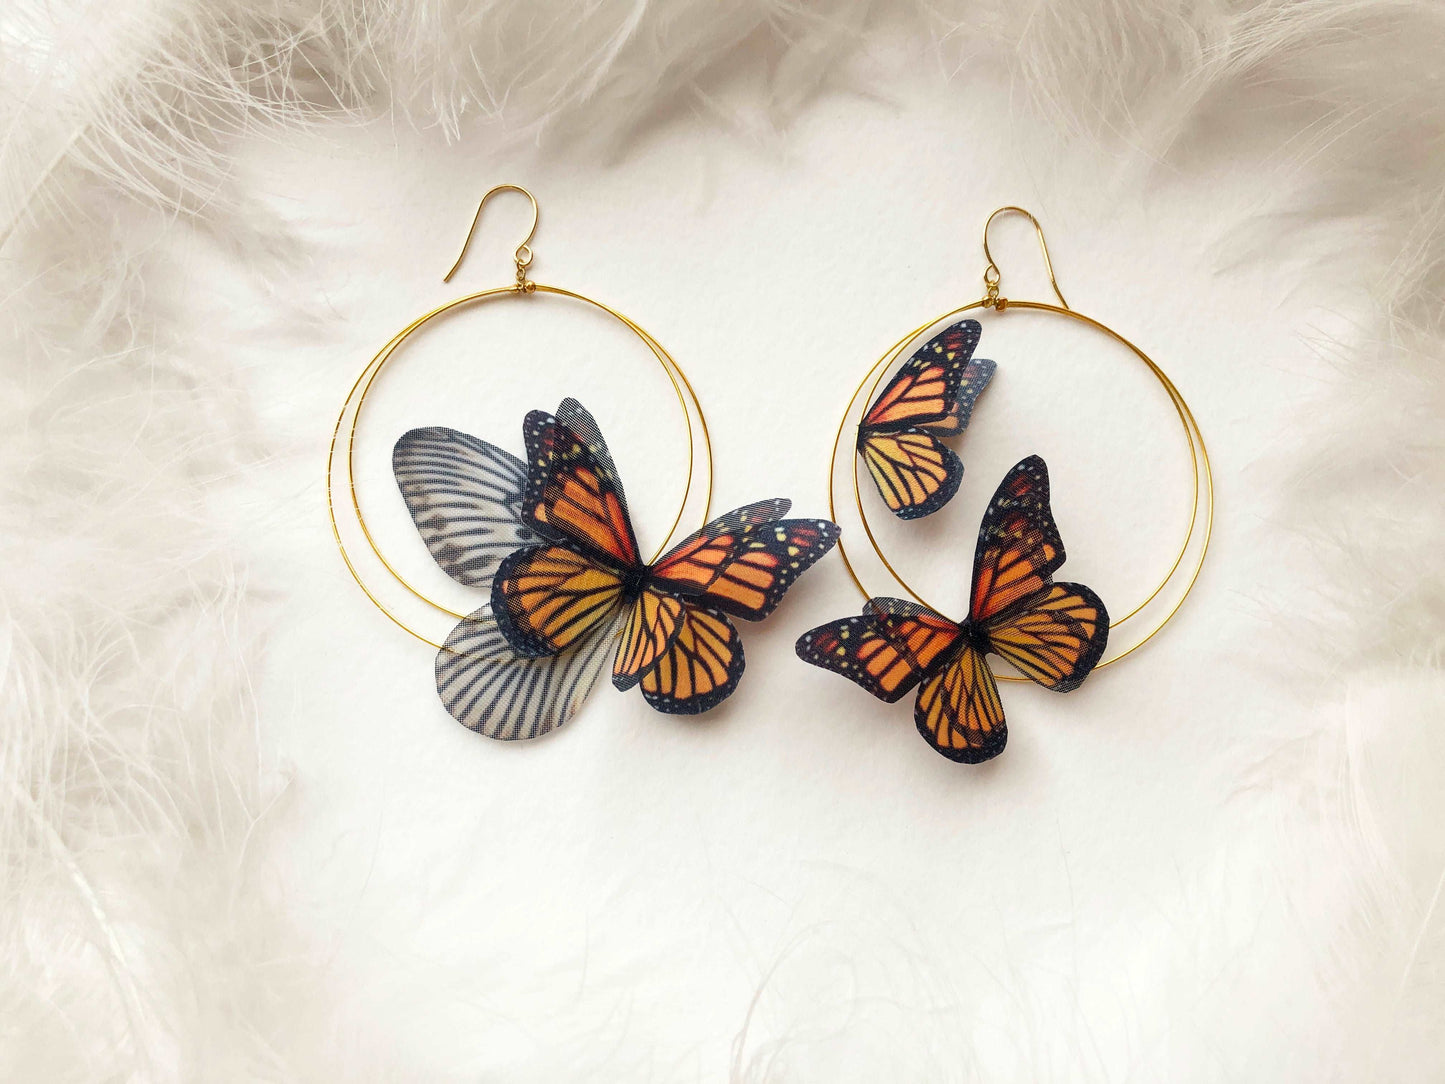 Close-up of the faux Monarch Butterflies on the hoop earrings